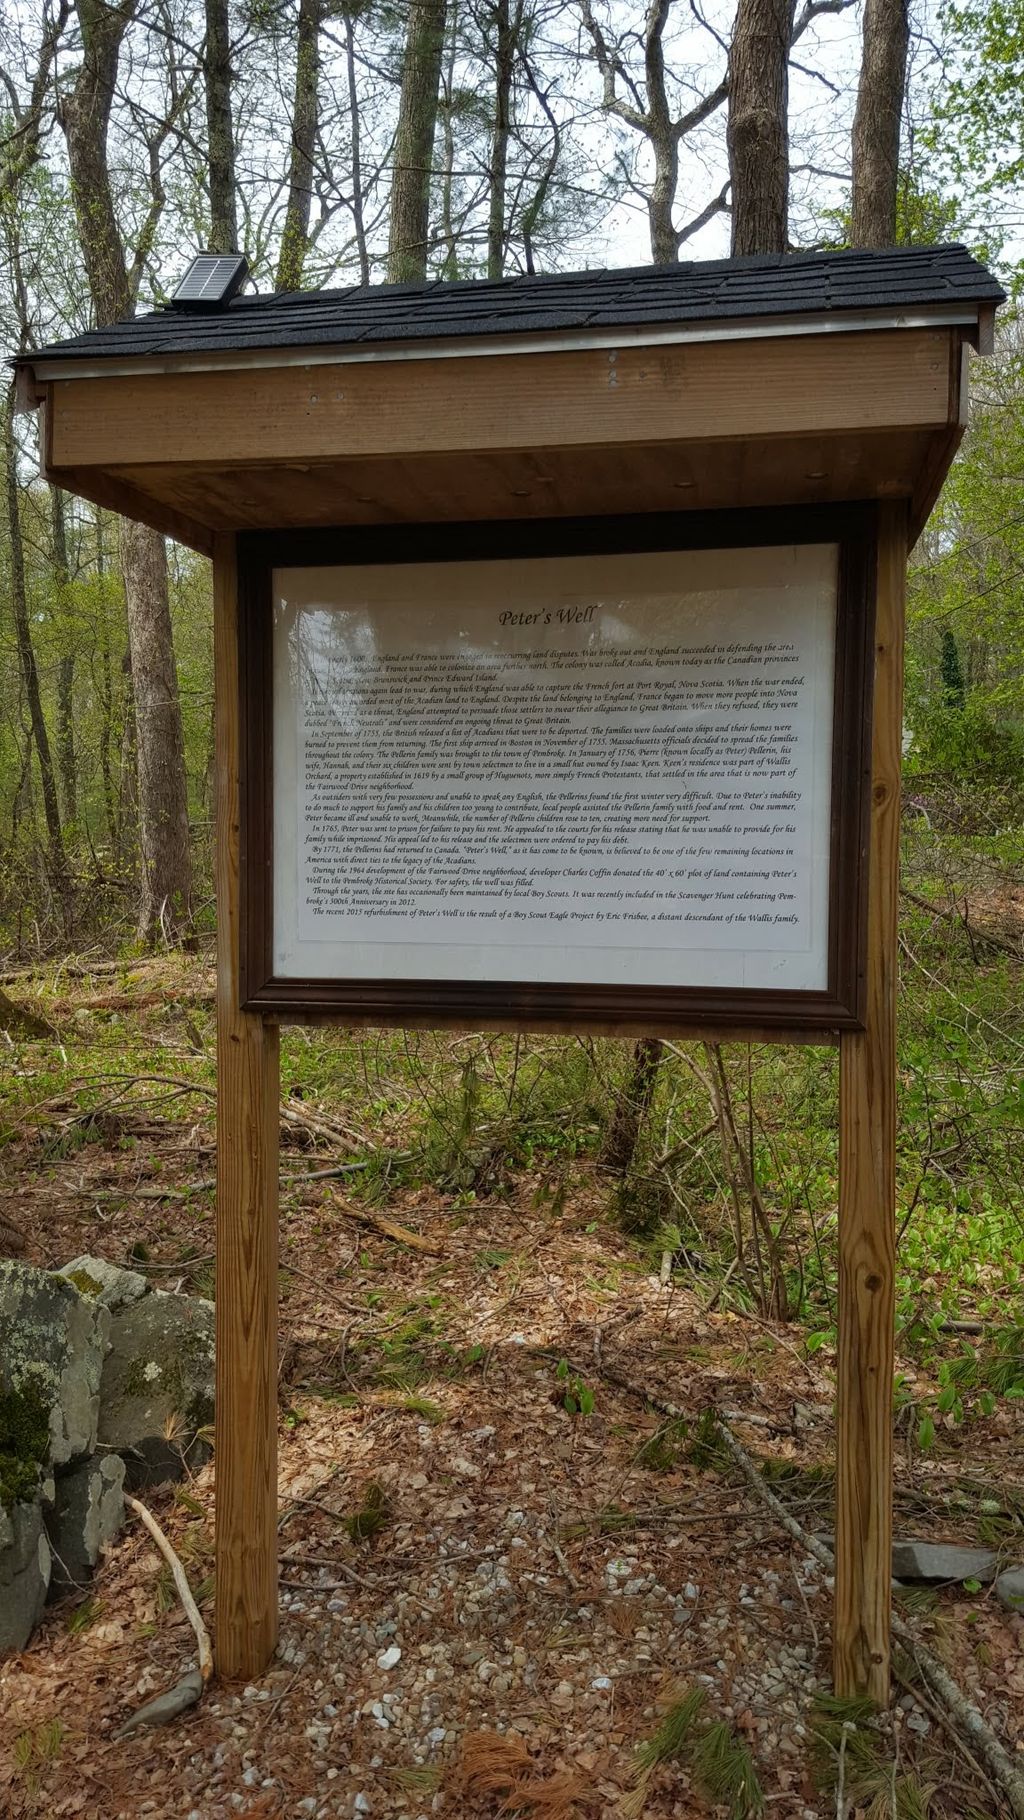 Peter's Well Historical Site